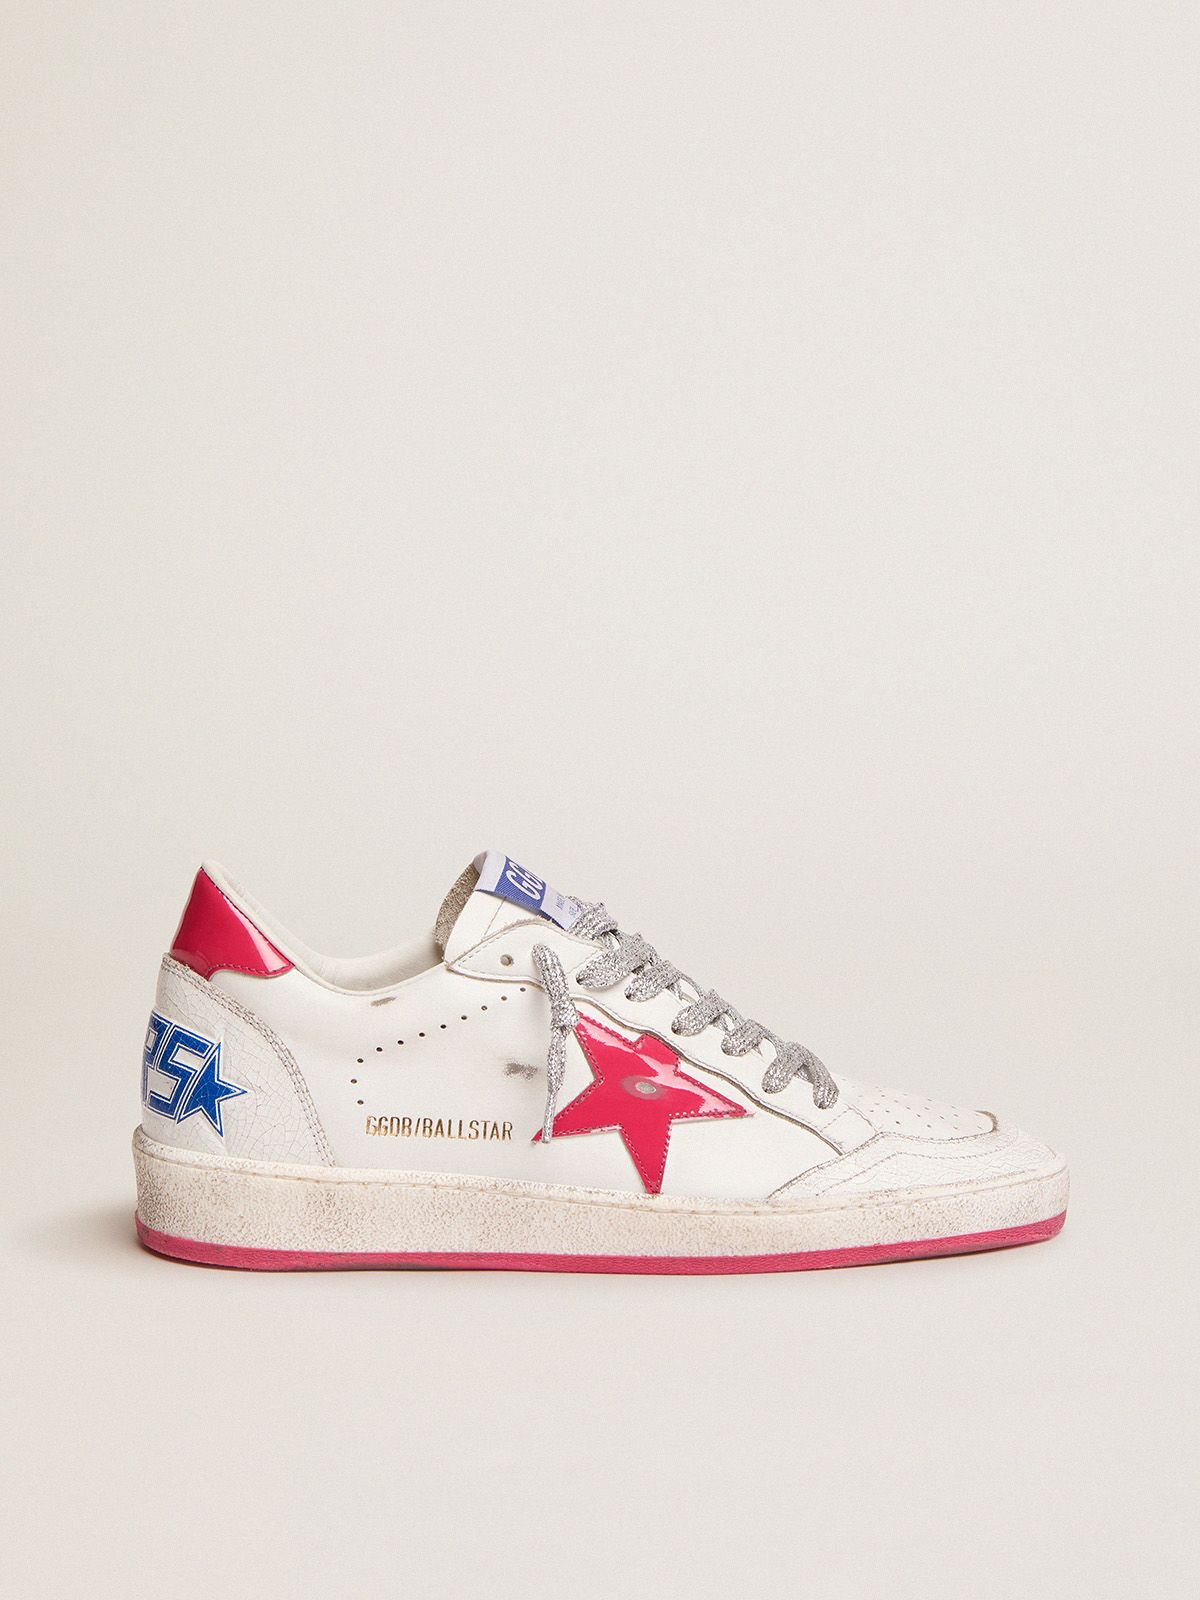 golden goose detail leather in red sneakers LTD patent Ball Star with white